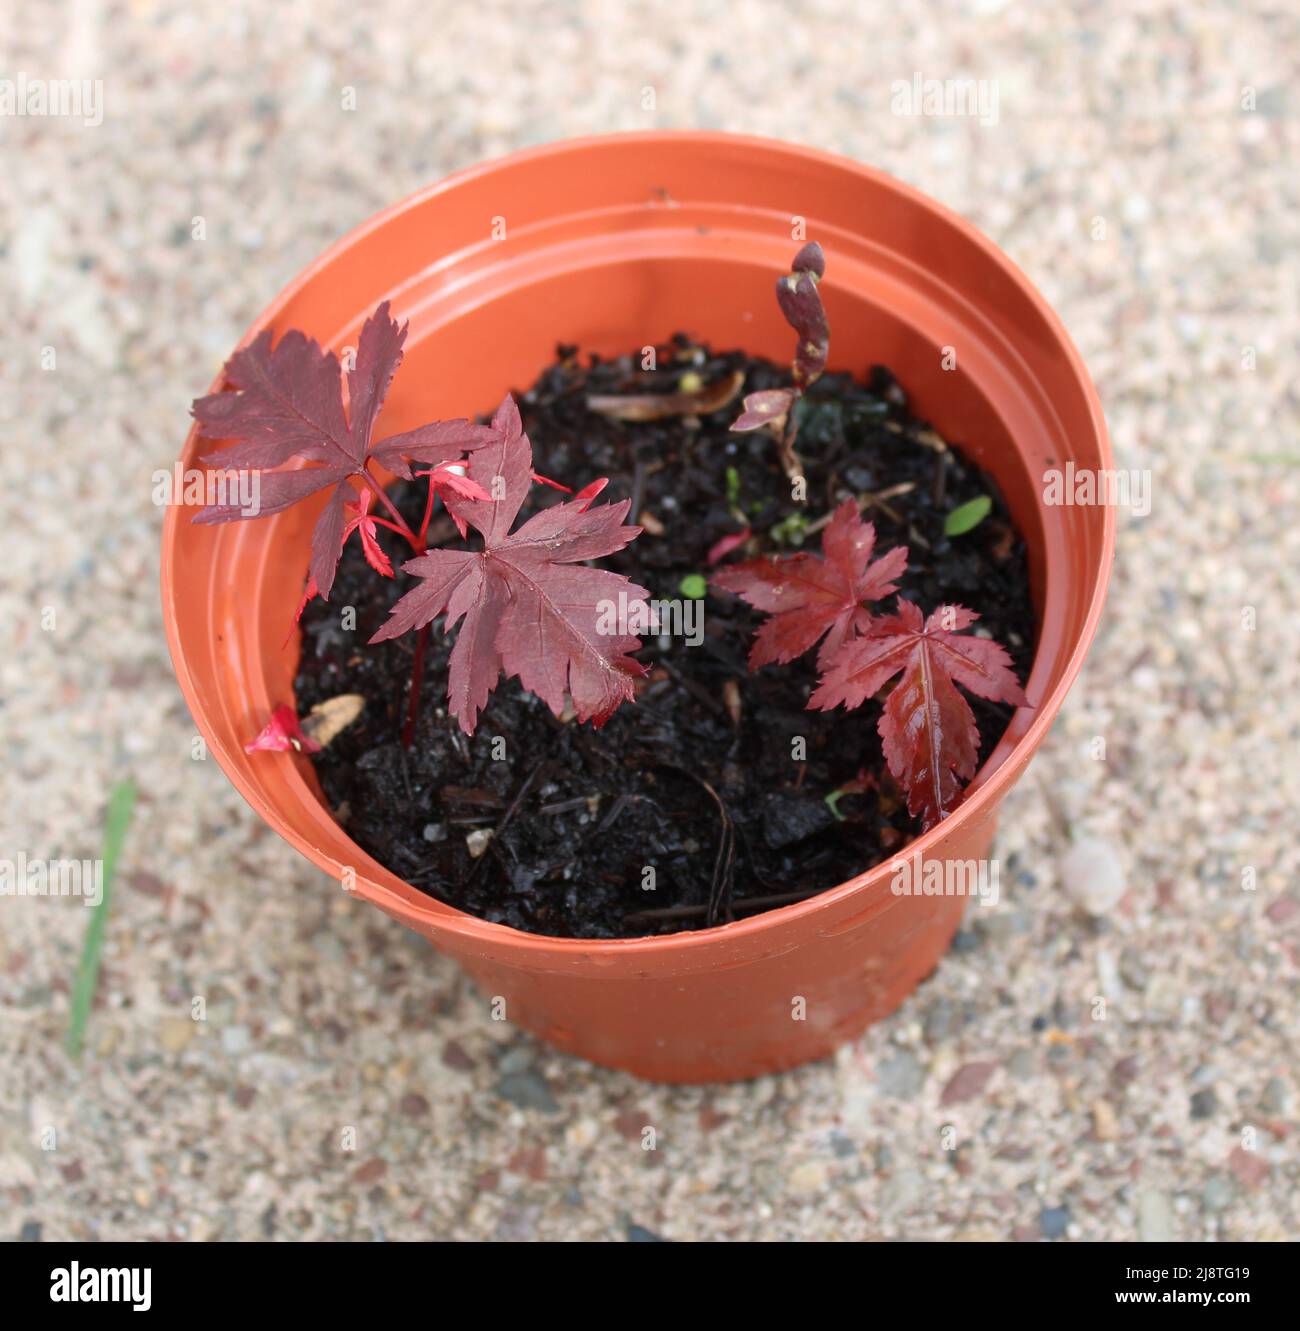 Japanese Red Maple Seedlings in a Pot Stock Photo